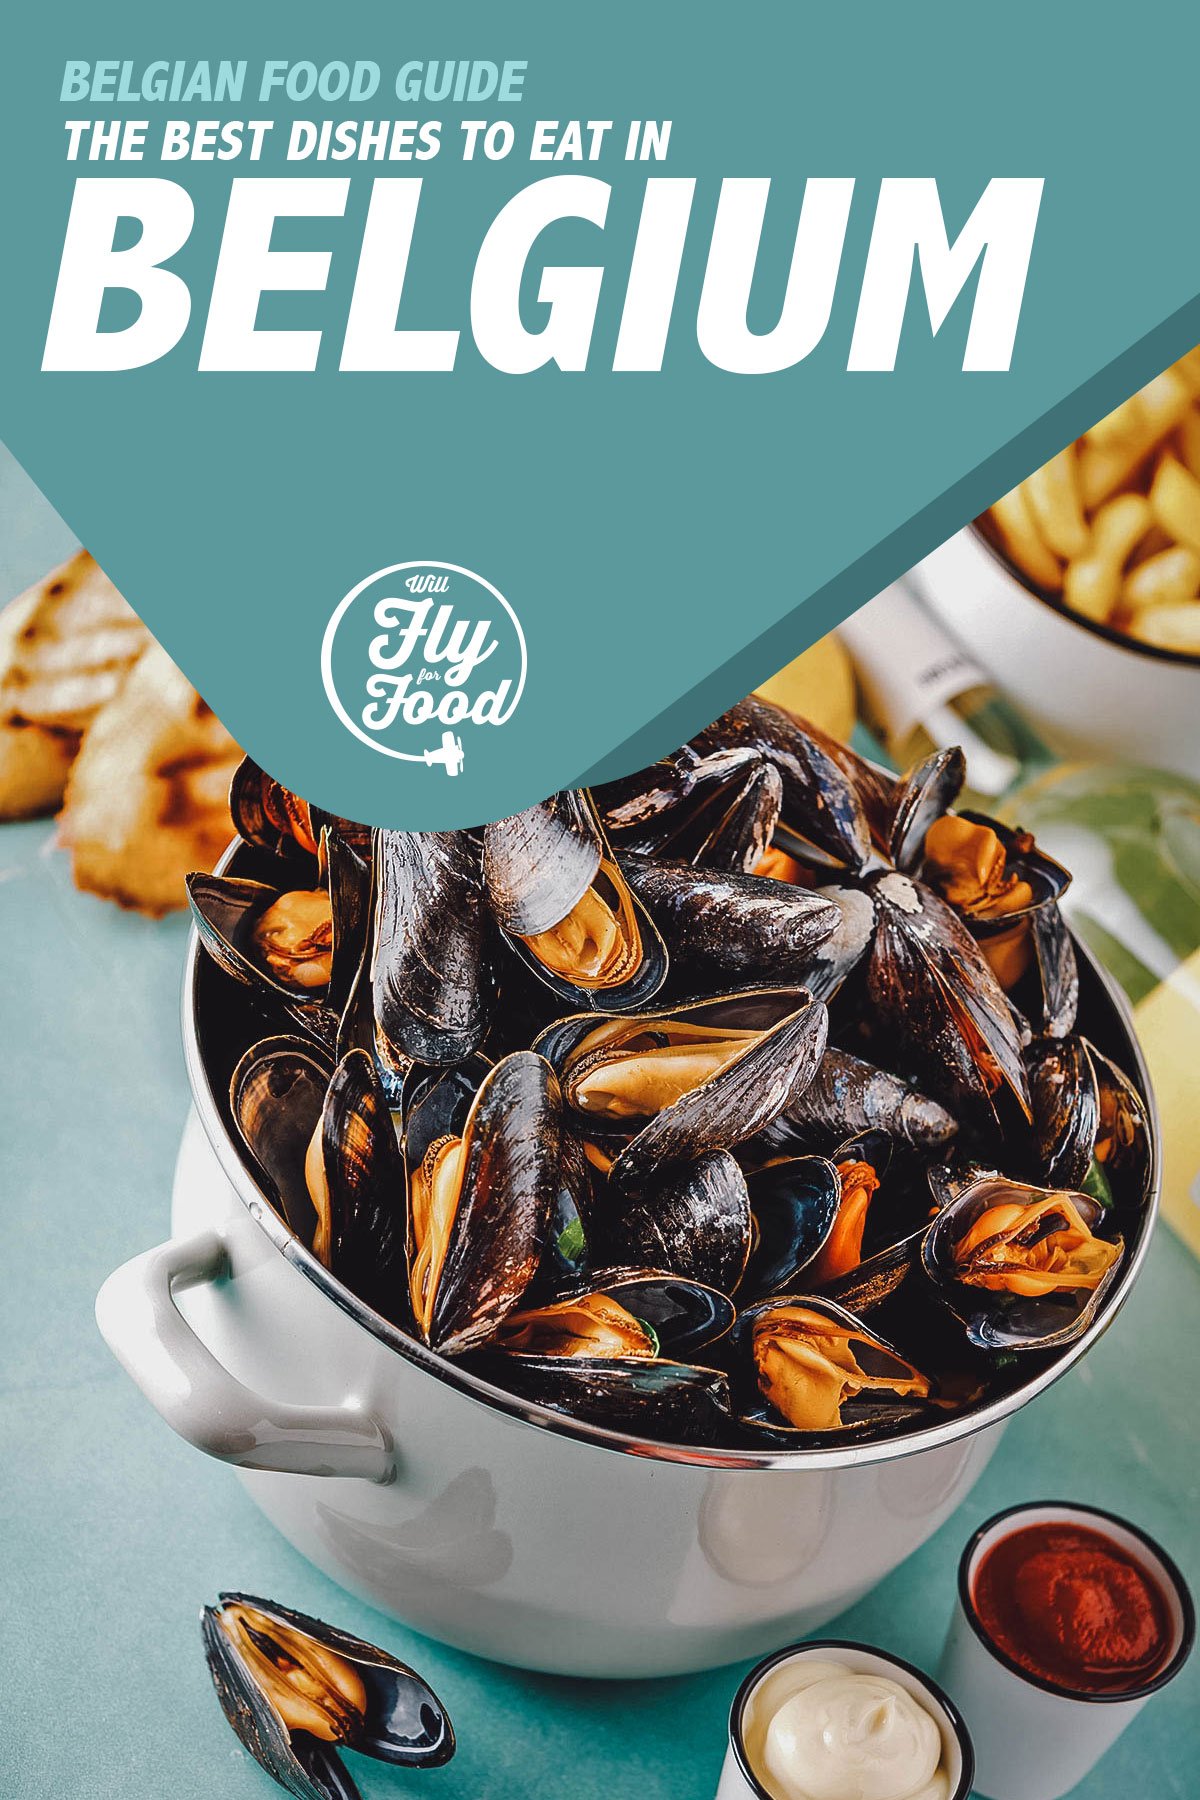 Pot of mussels and fries in Belgium